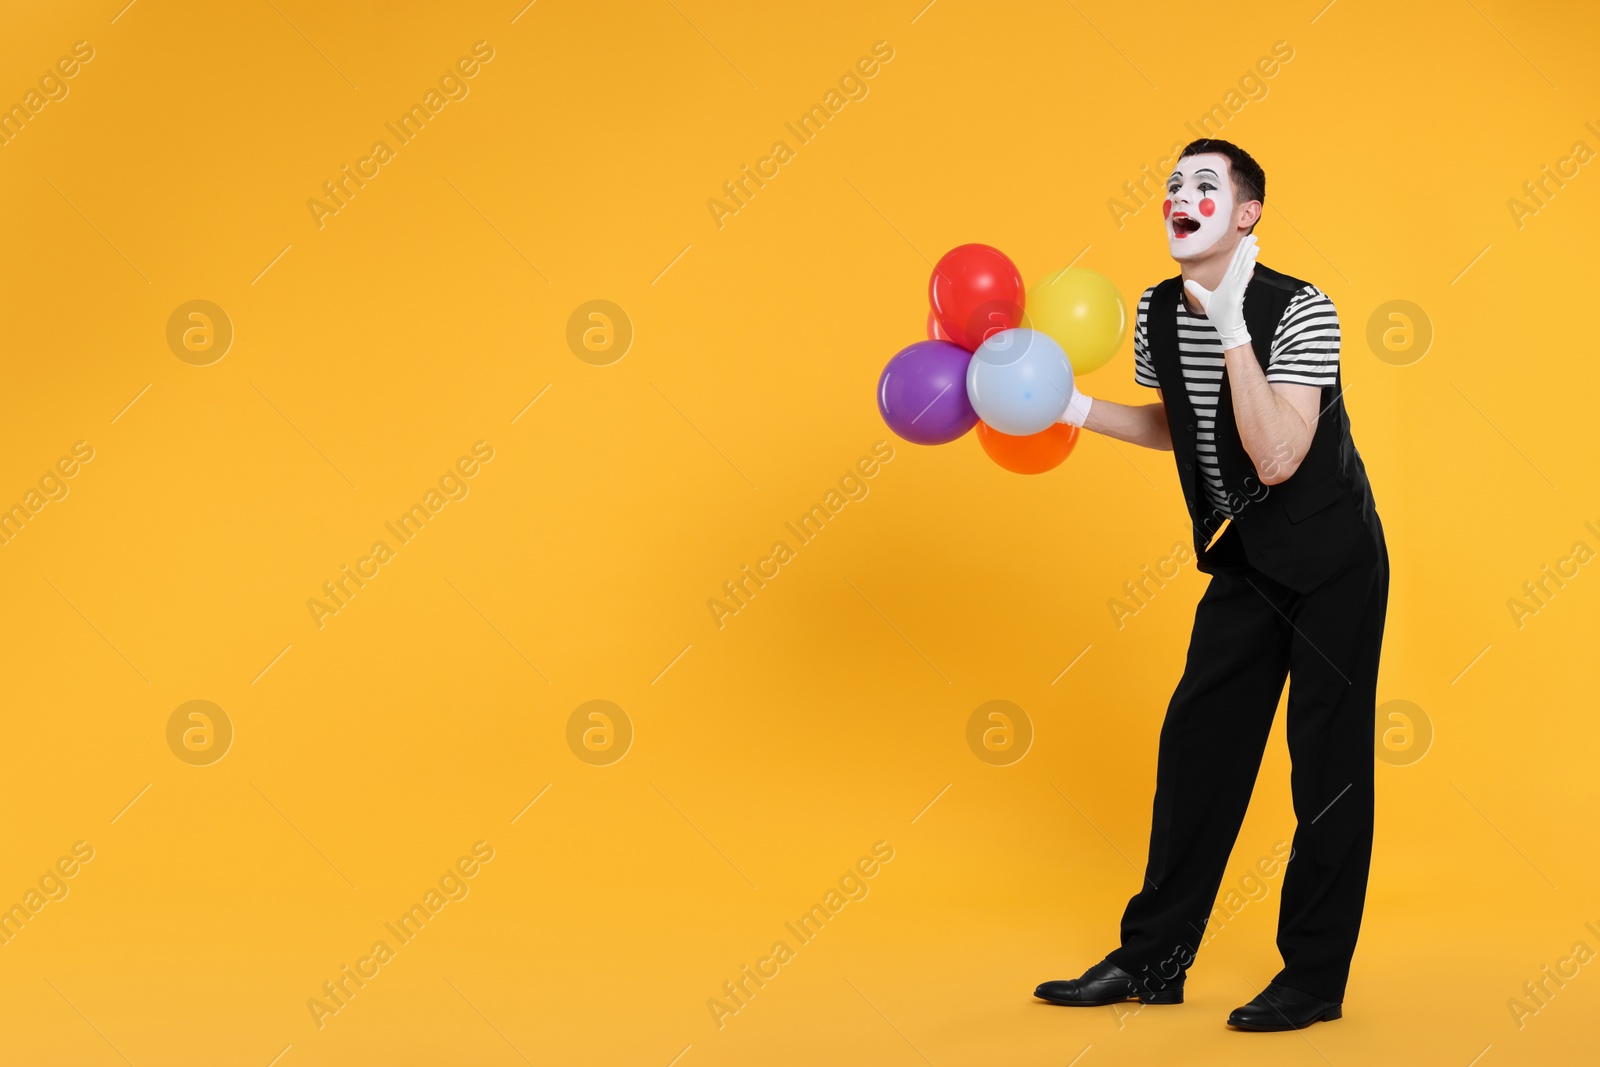 Photo of Funny mime artist with balloons screaming on orange background. Space for text